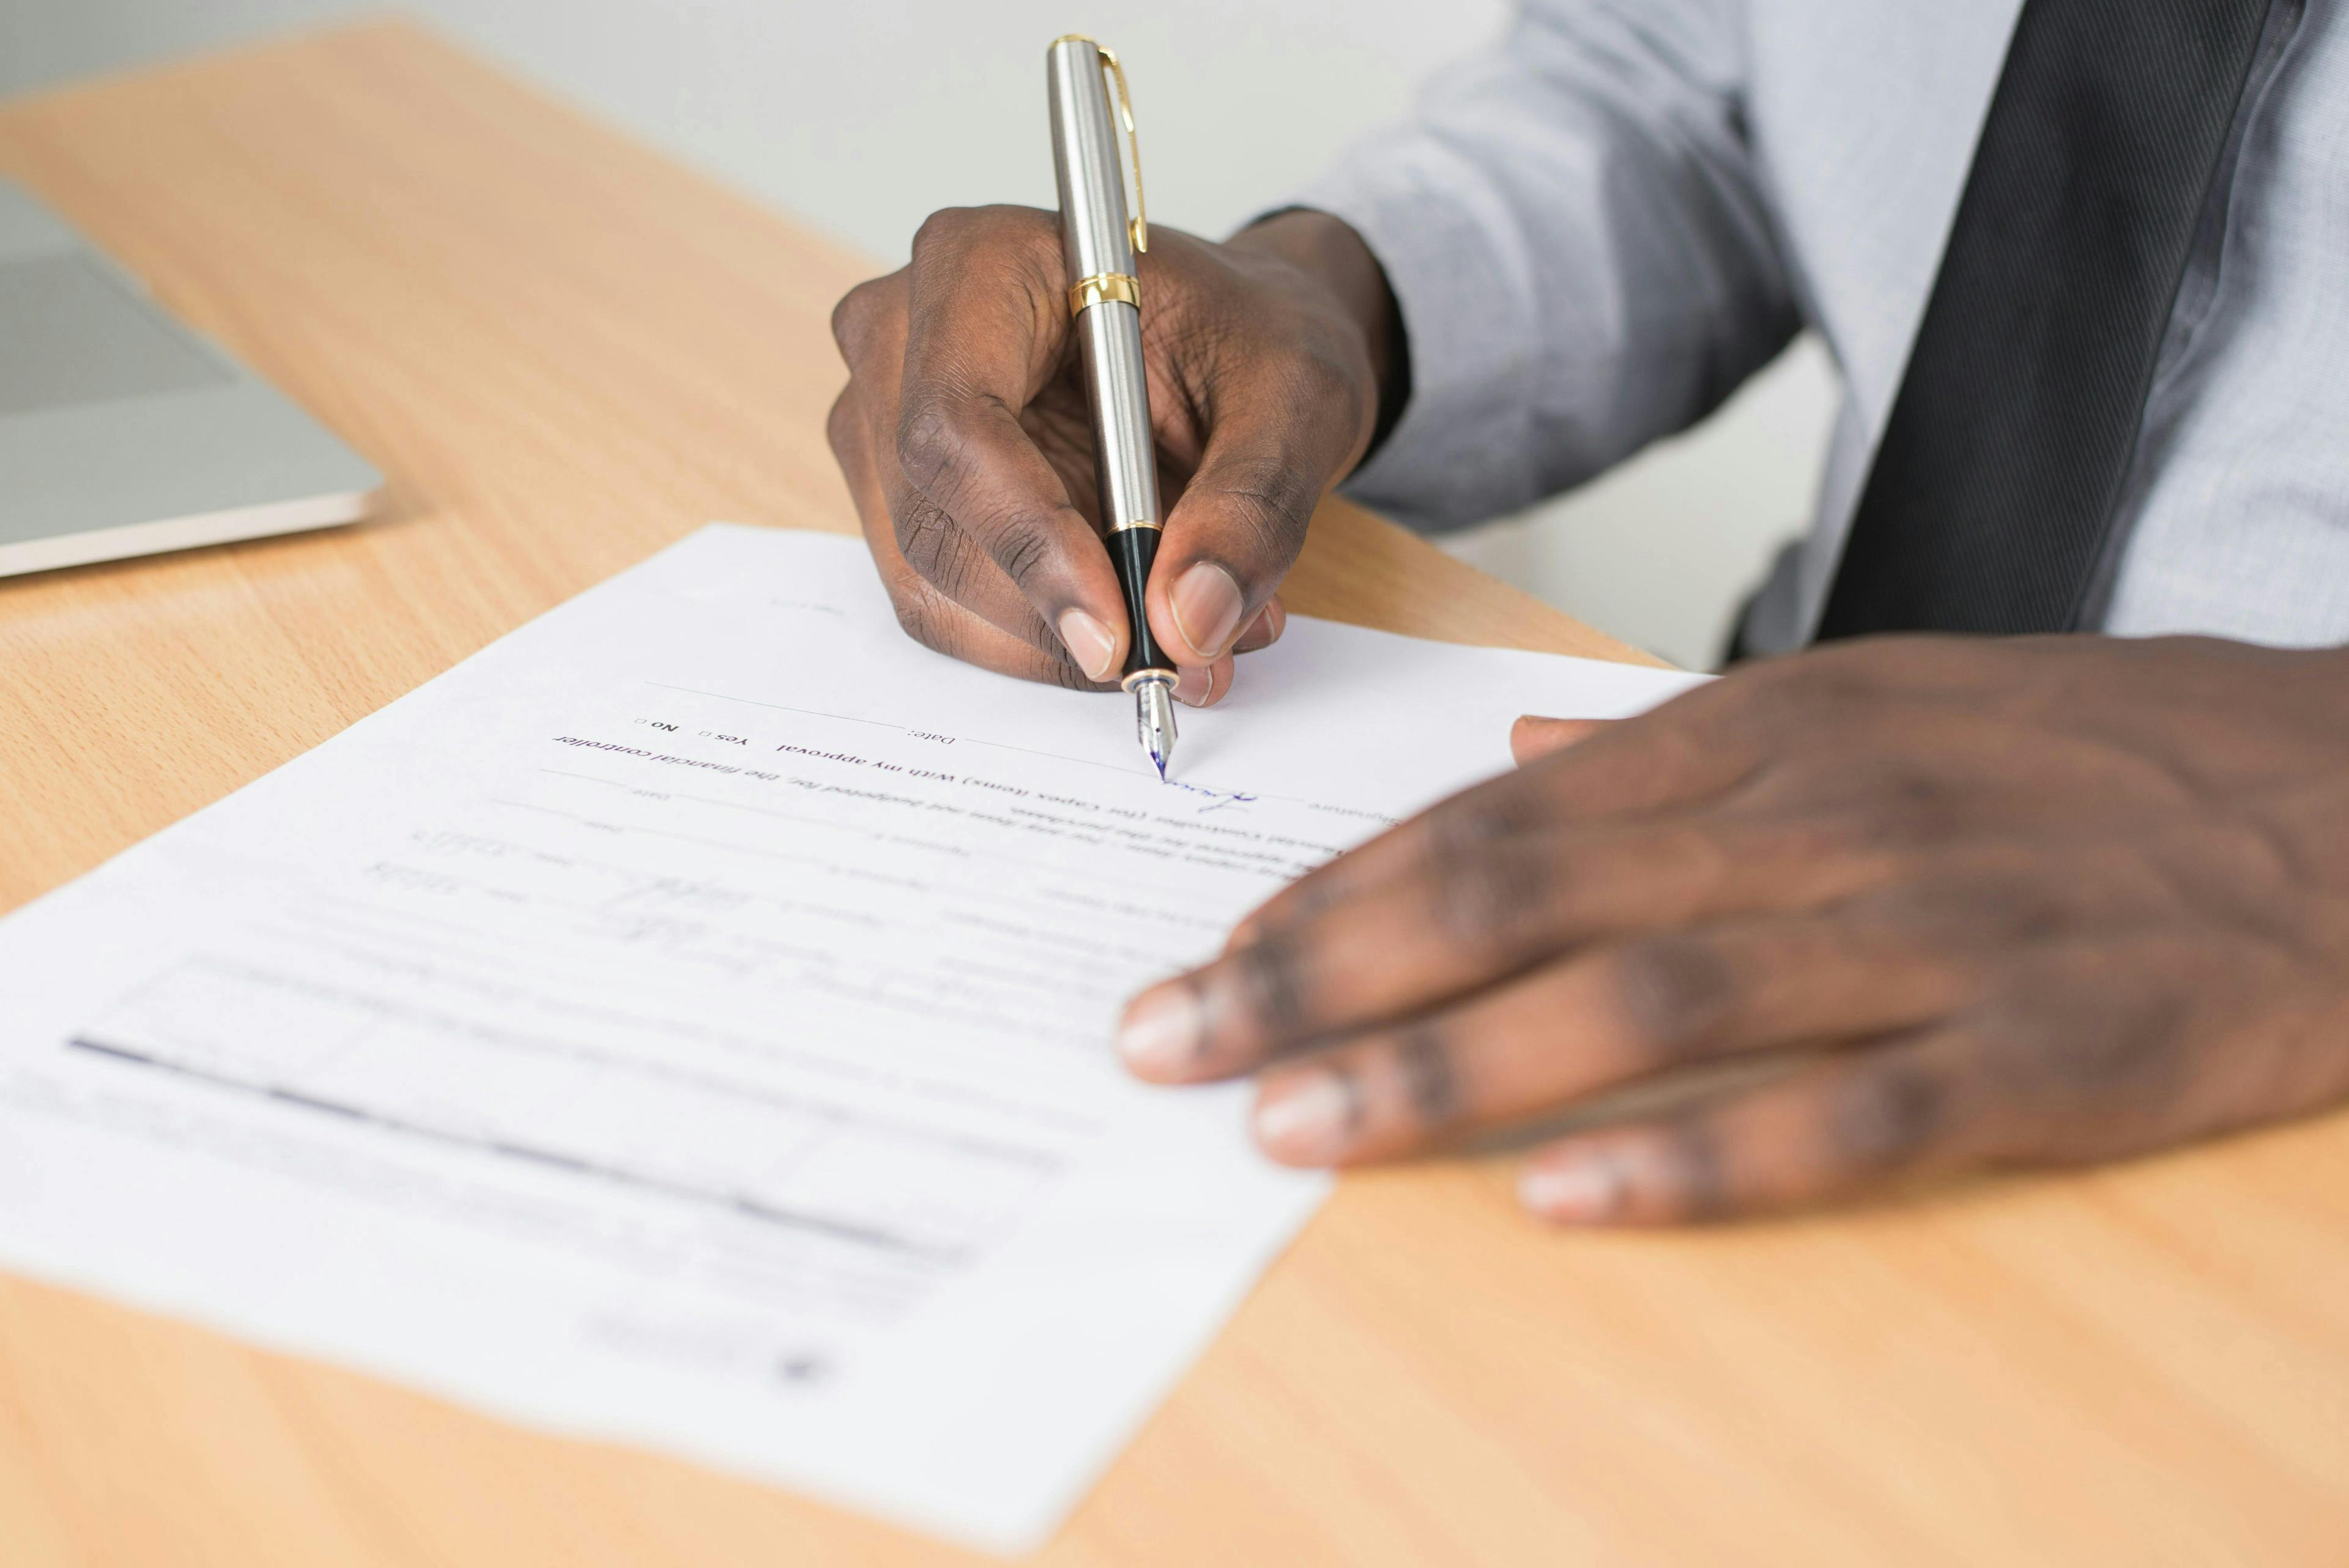 A close-up image showing only the hands of a man as he signs an application form. One hand is gently resting on the form, providing stability, while the other holds a sleek silver pen, poised in the act of signing. The focus is on the precise movement of the pen on the paper.